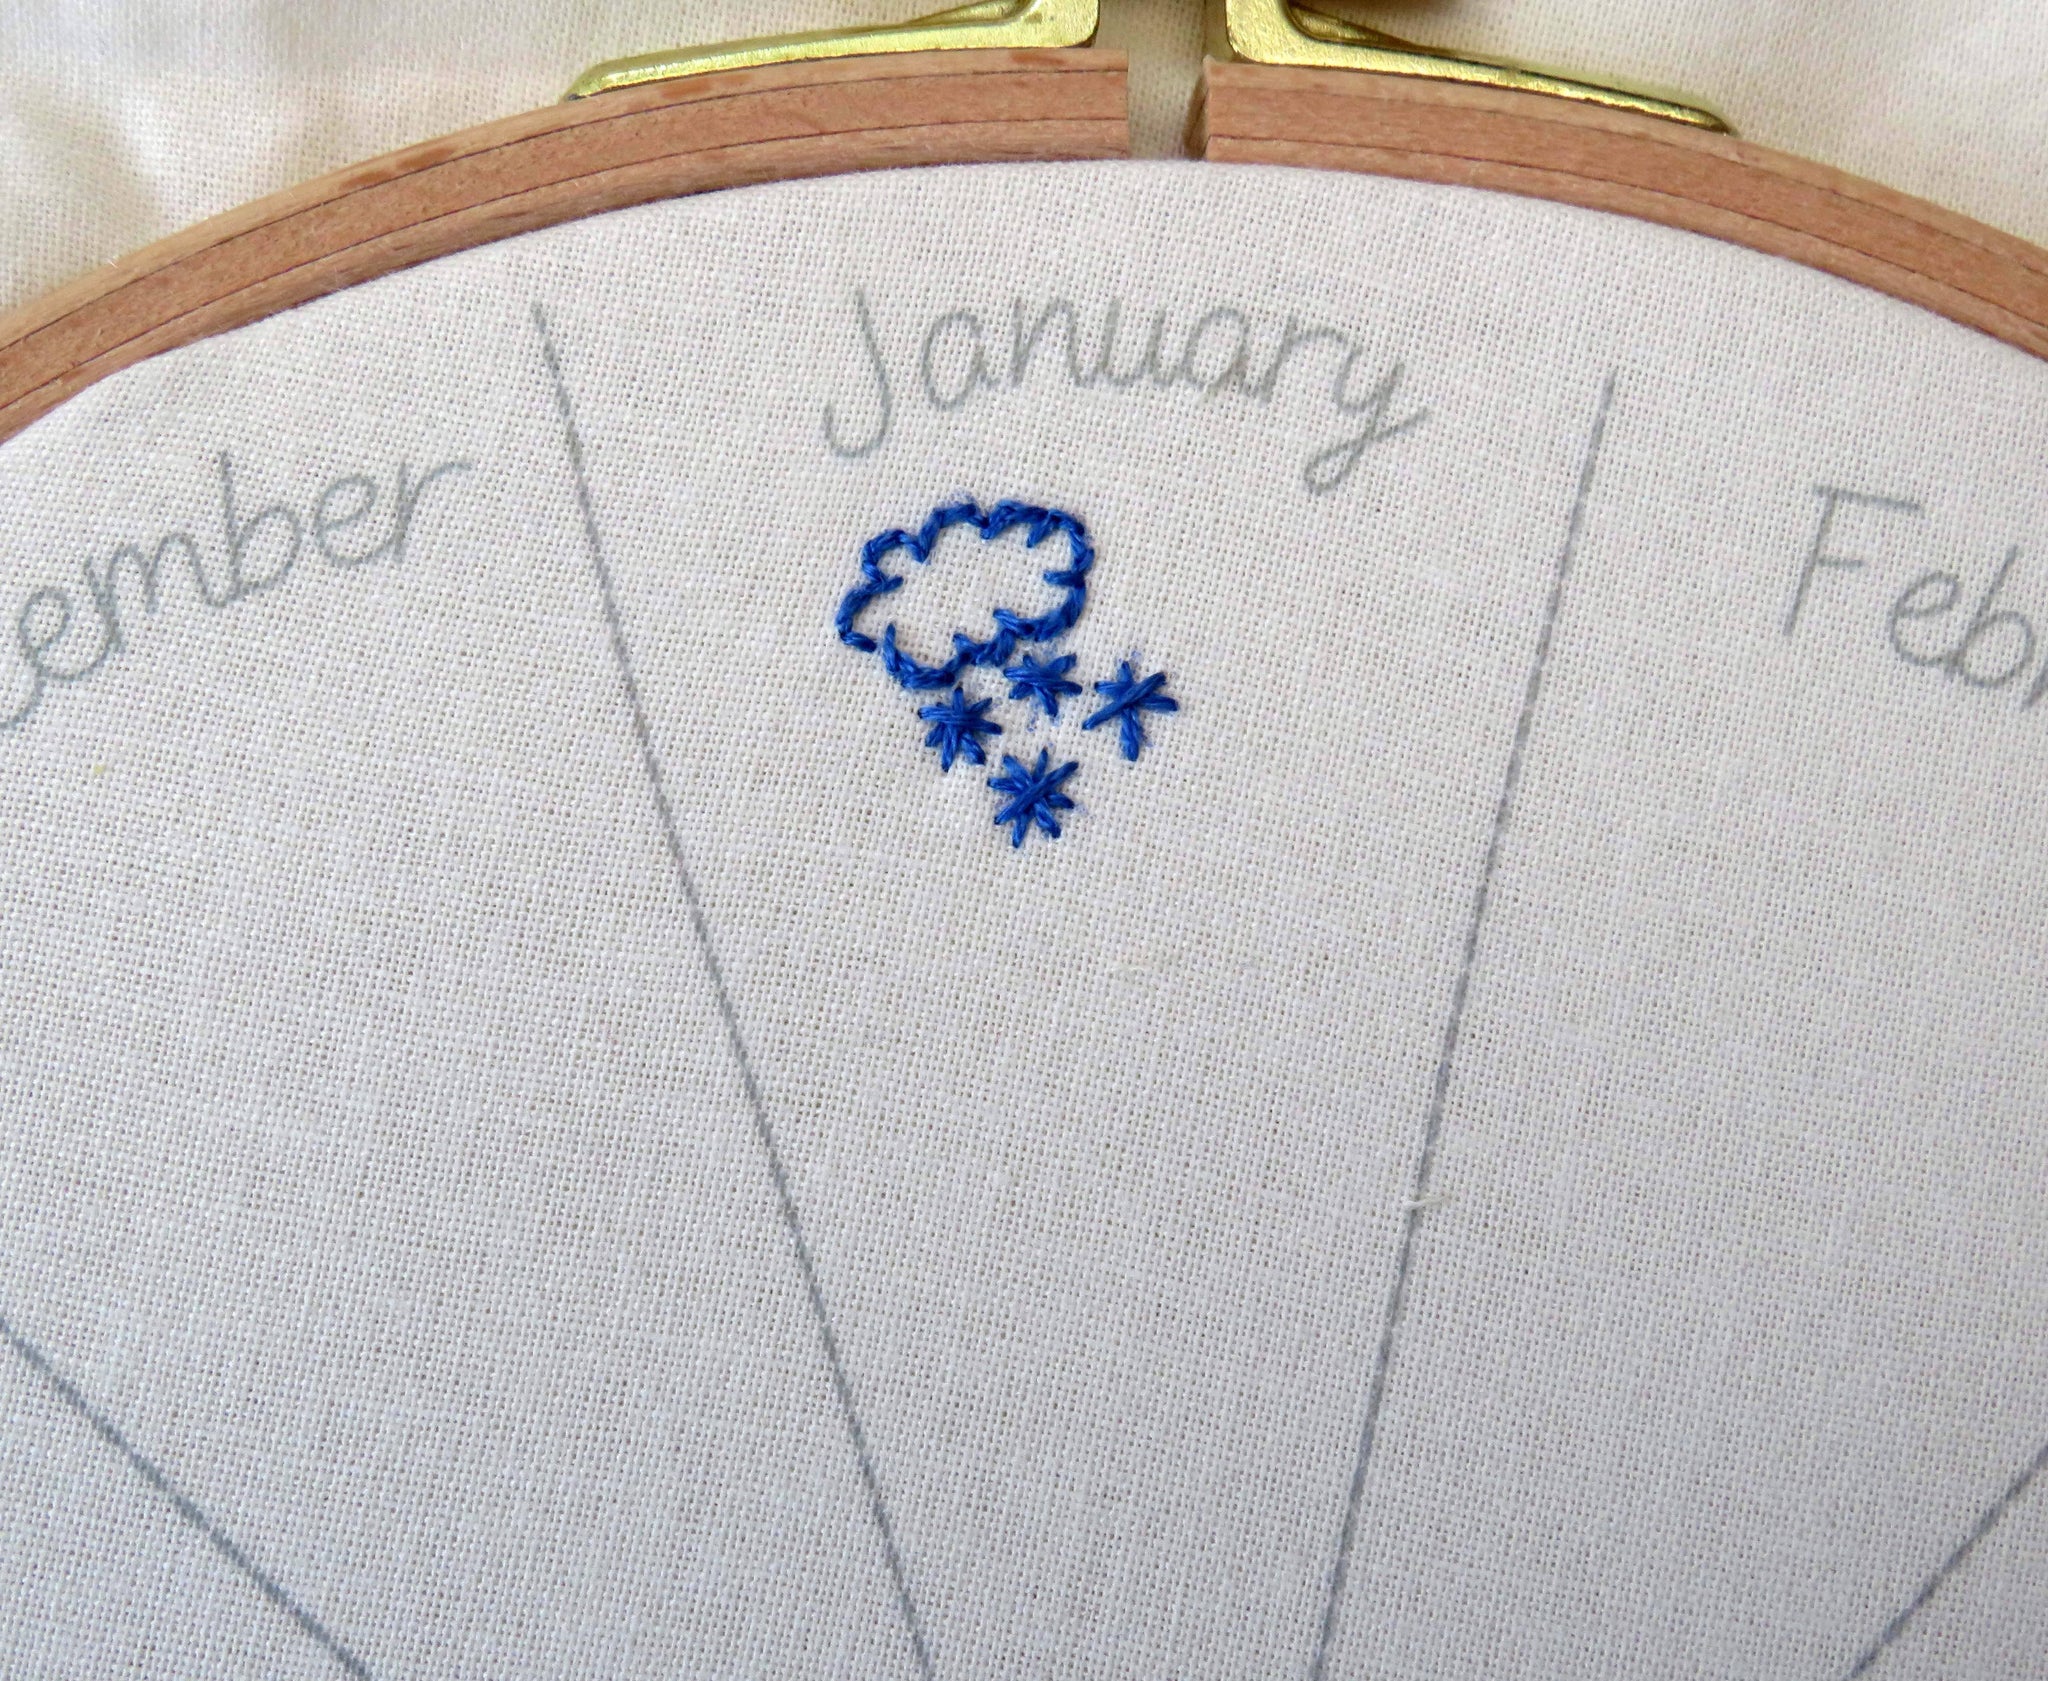 Embroidery Journal Hand Embroidery Templates – StitchDoodles